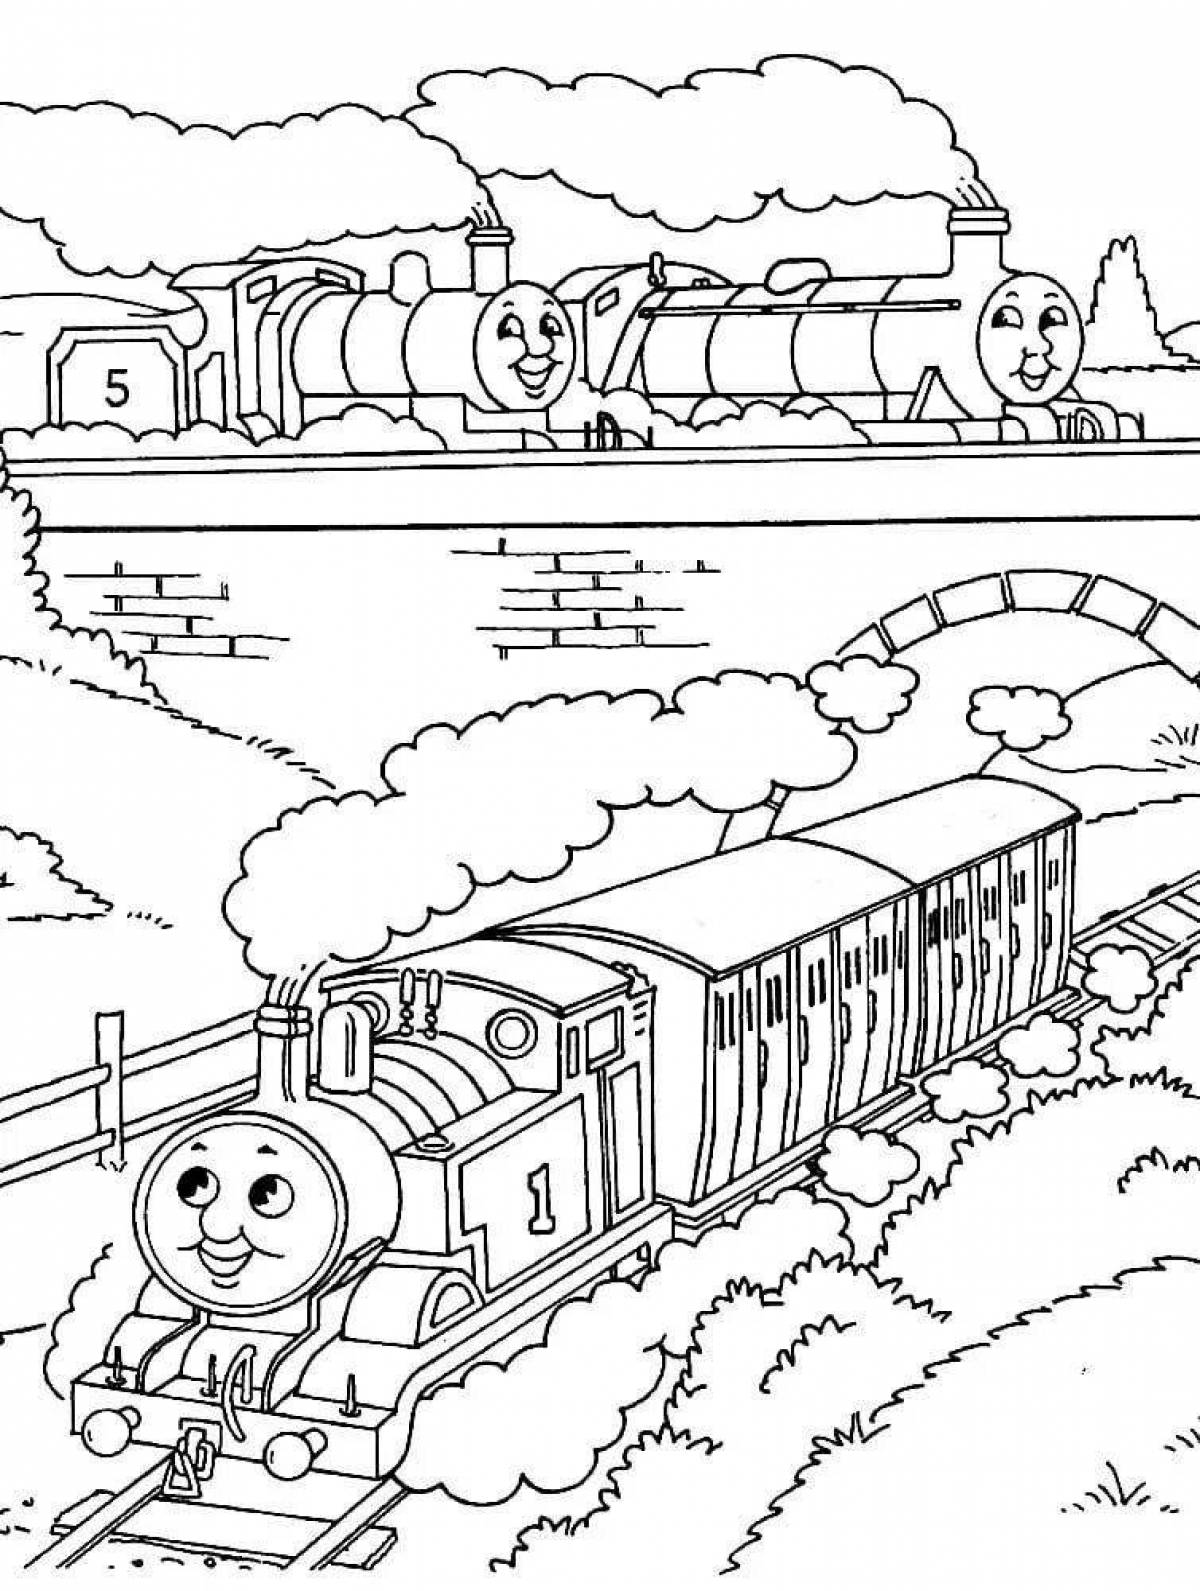 Thomas's amazing train coloring page